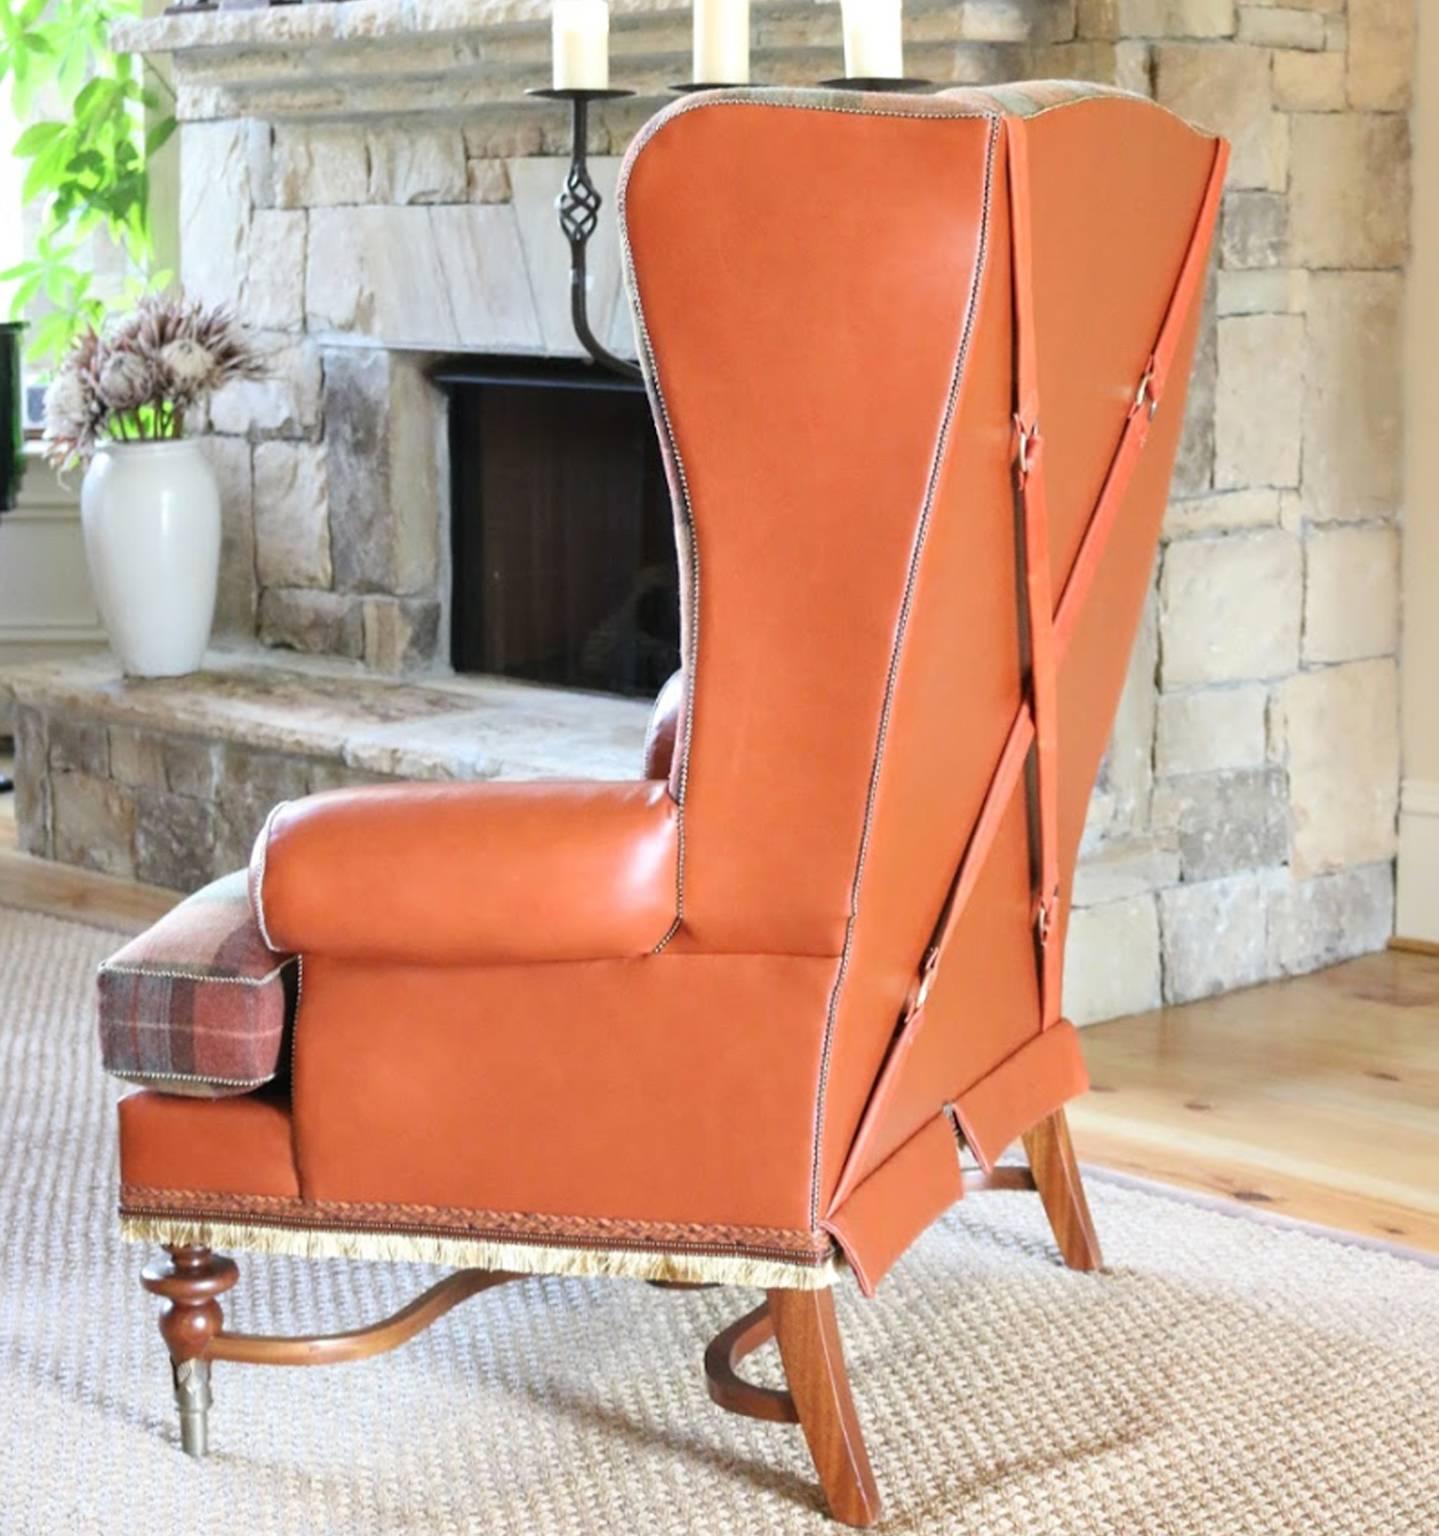 Our one of a kind Highland wing chair with its exposed wood carved legs and struts encased in bronze ferrules handcrafted in Providence, with wide, deeply cut regal wings. Tight back and loose cushion down seat. A contemporary twist on carved